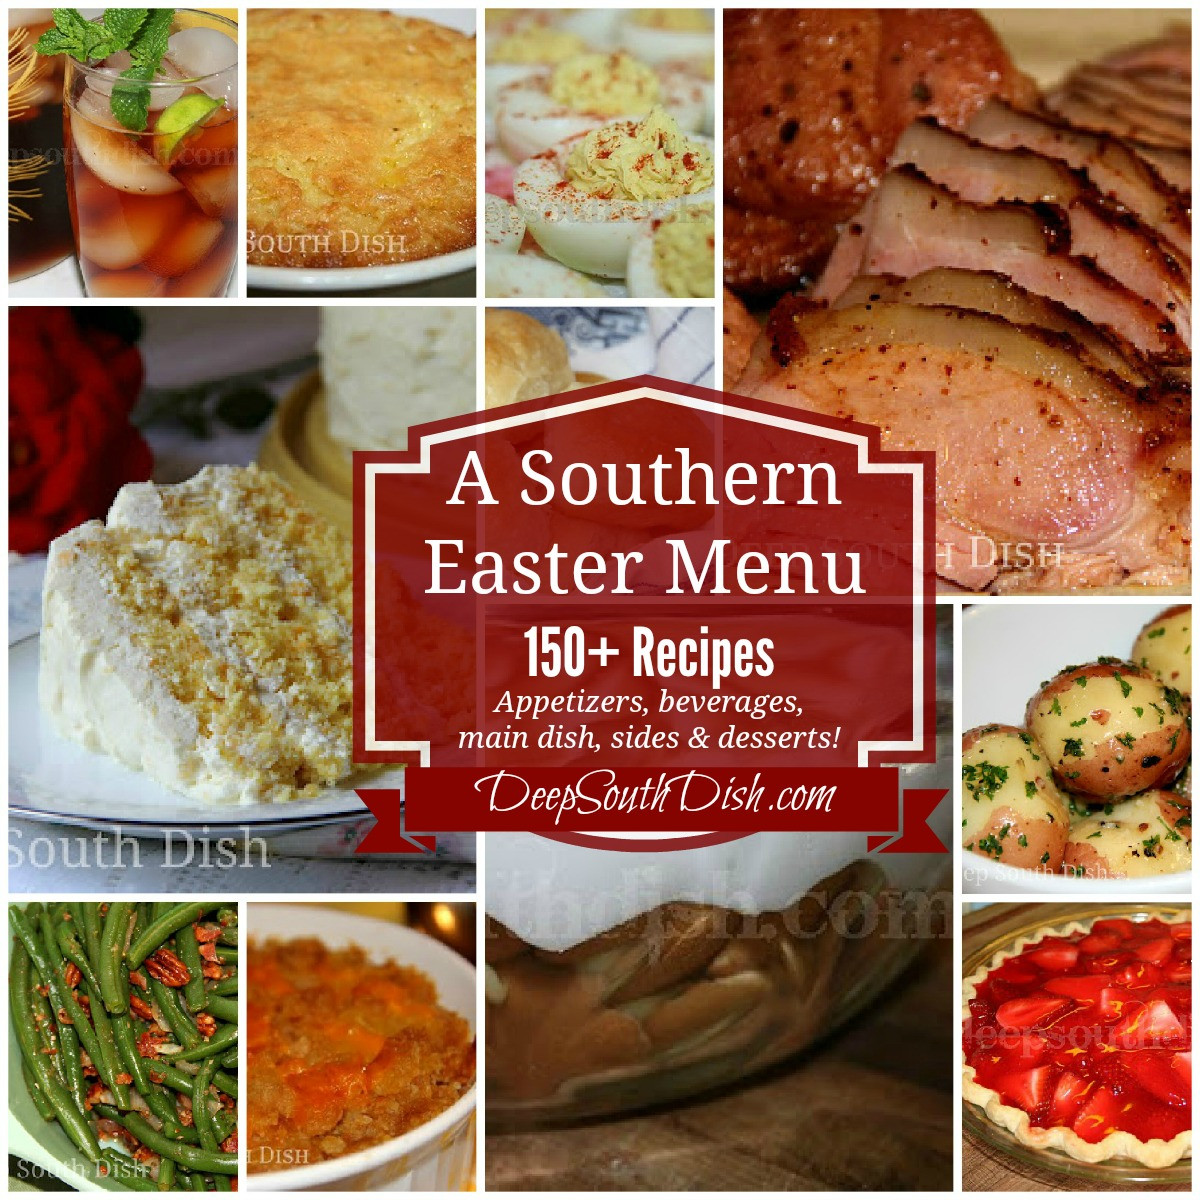 Dinner Ideas For Easter Sunday
 Deep South Dish Southern Easter Menu Ideas and Recipes